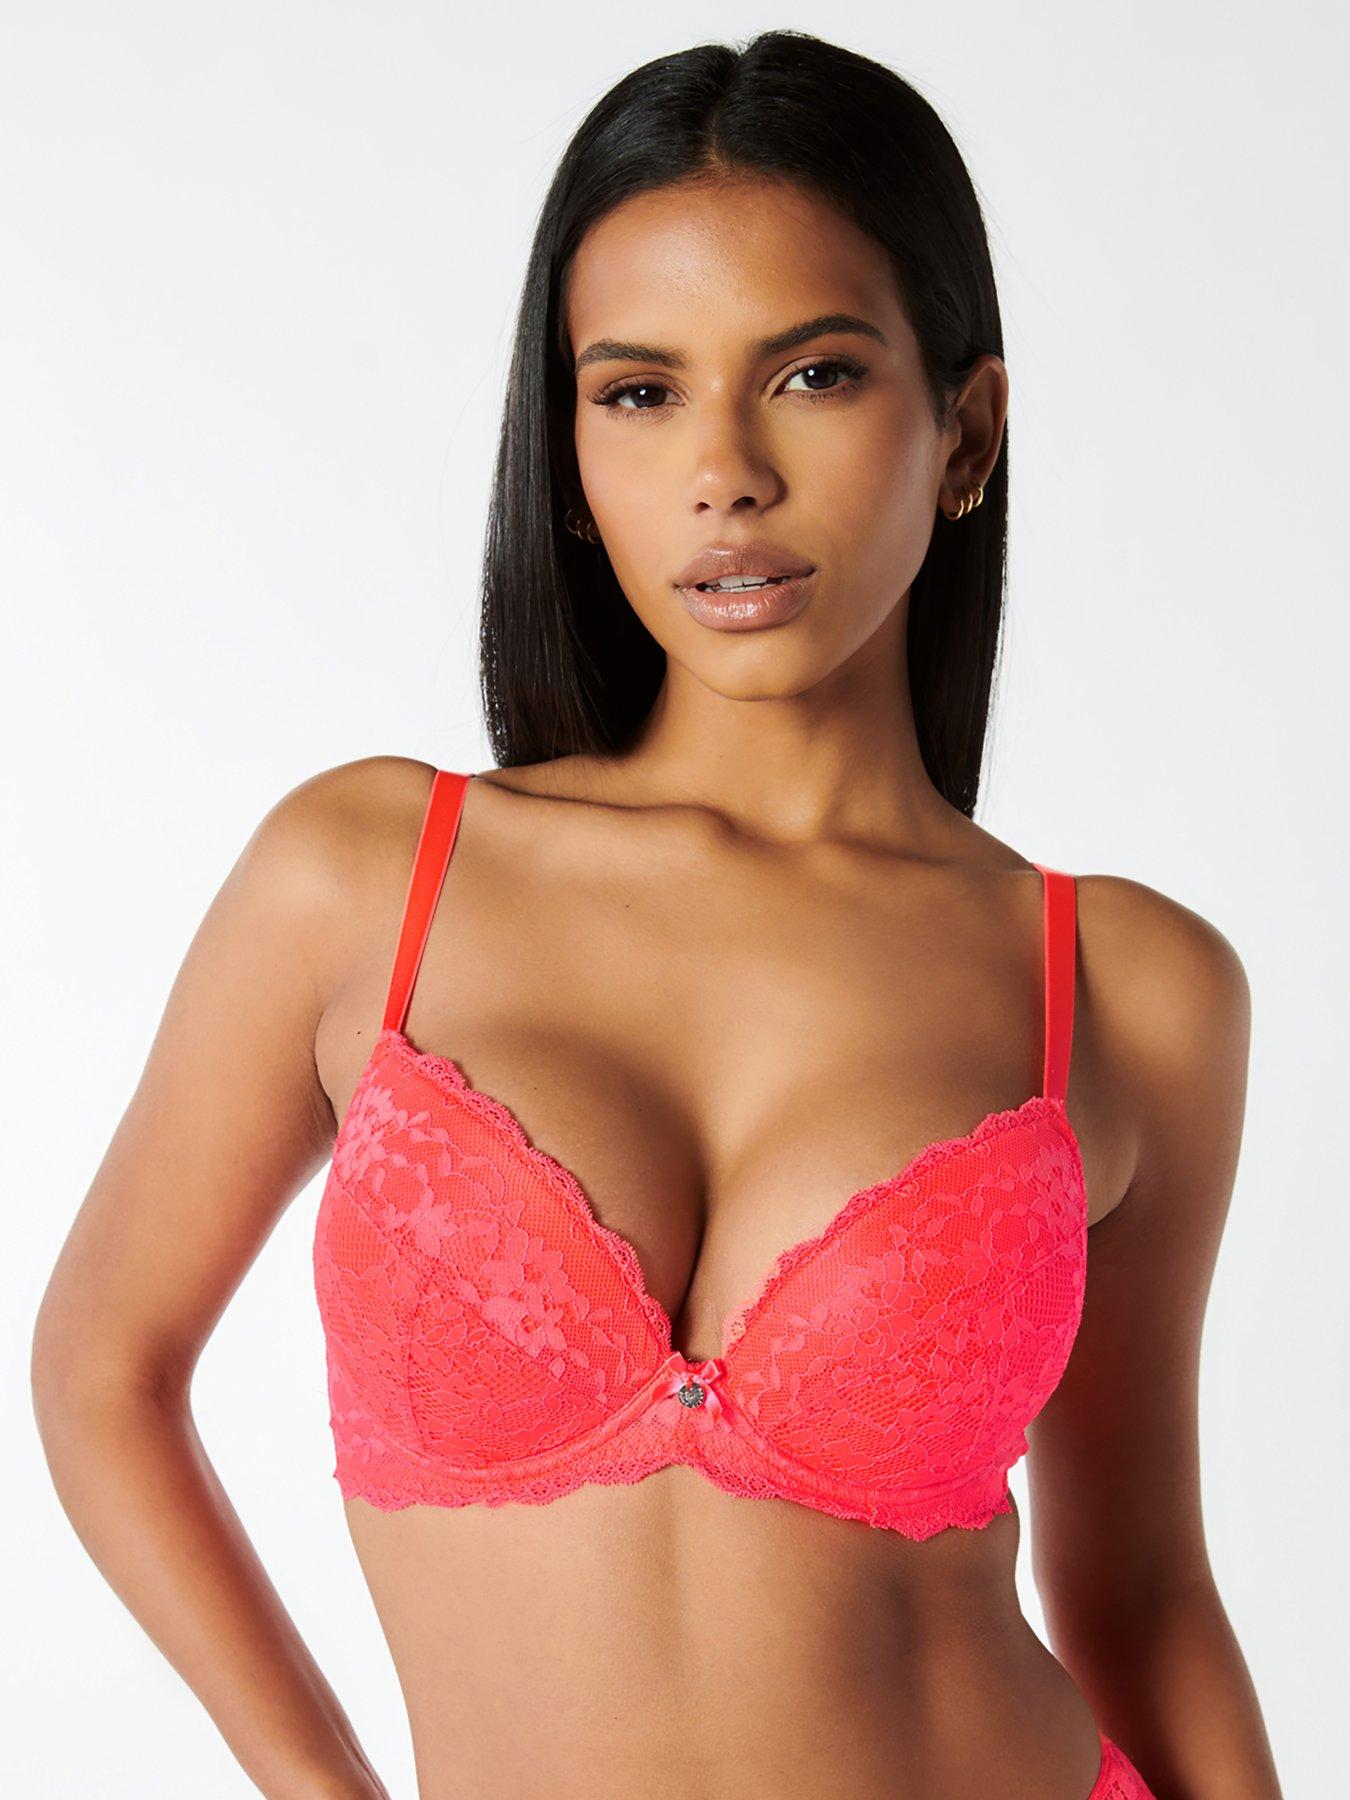 These 6 Boux Bra's Have over 500 - 5 Star Reviews!